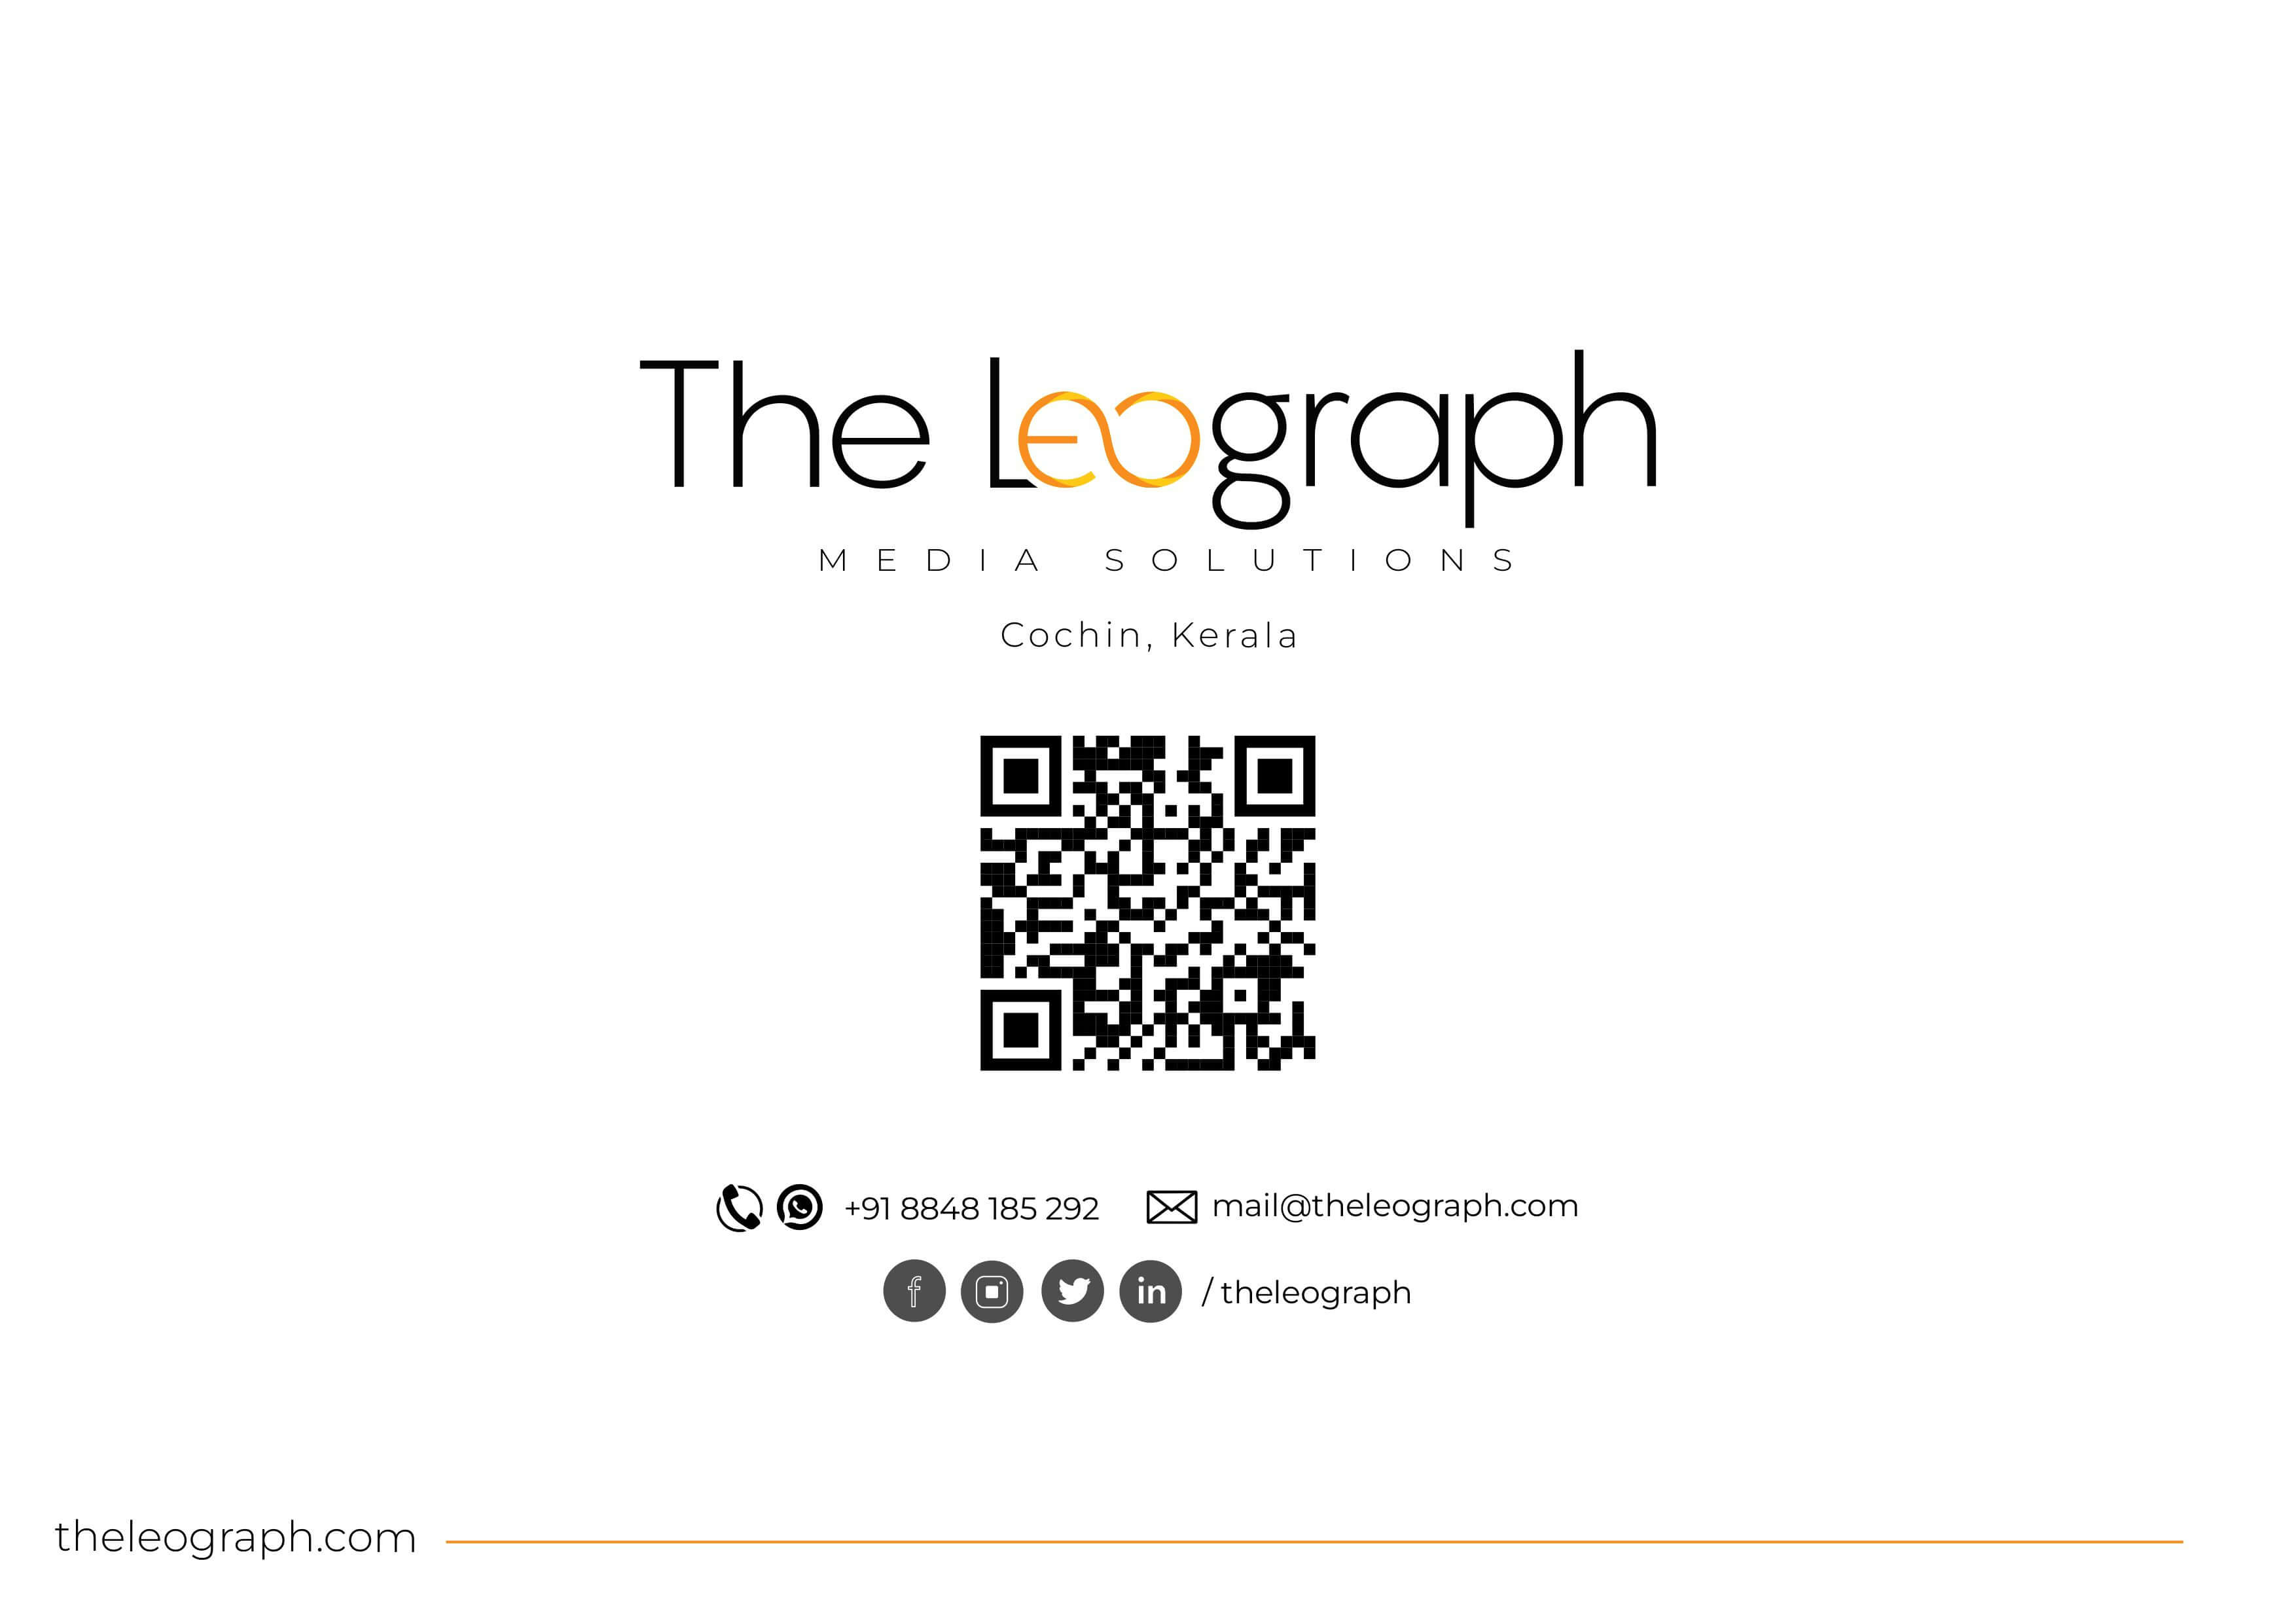 The Leograph Media Solutions